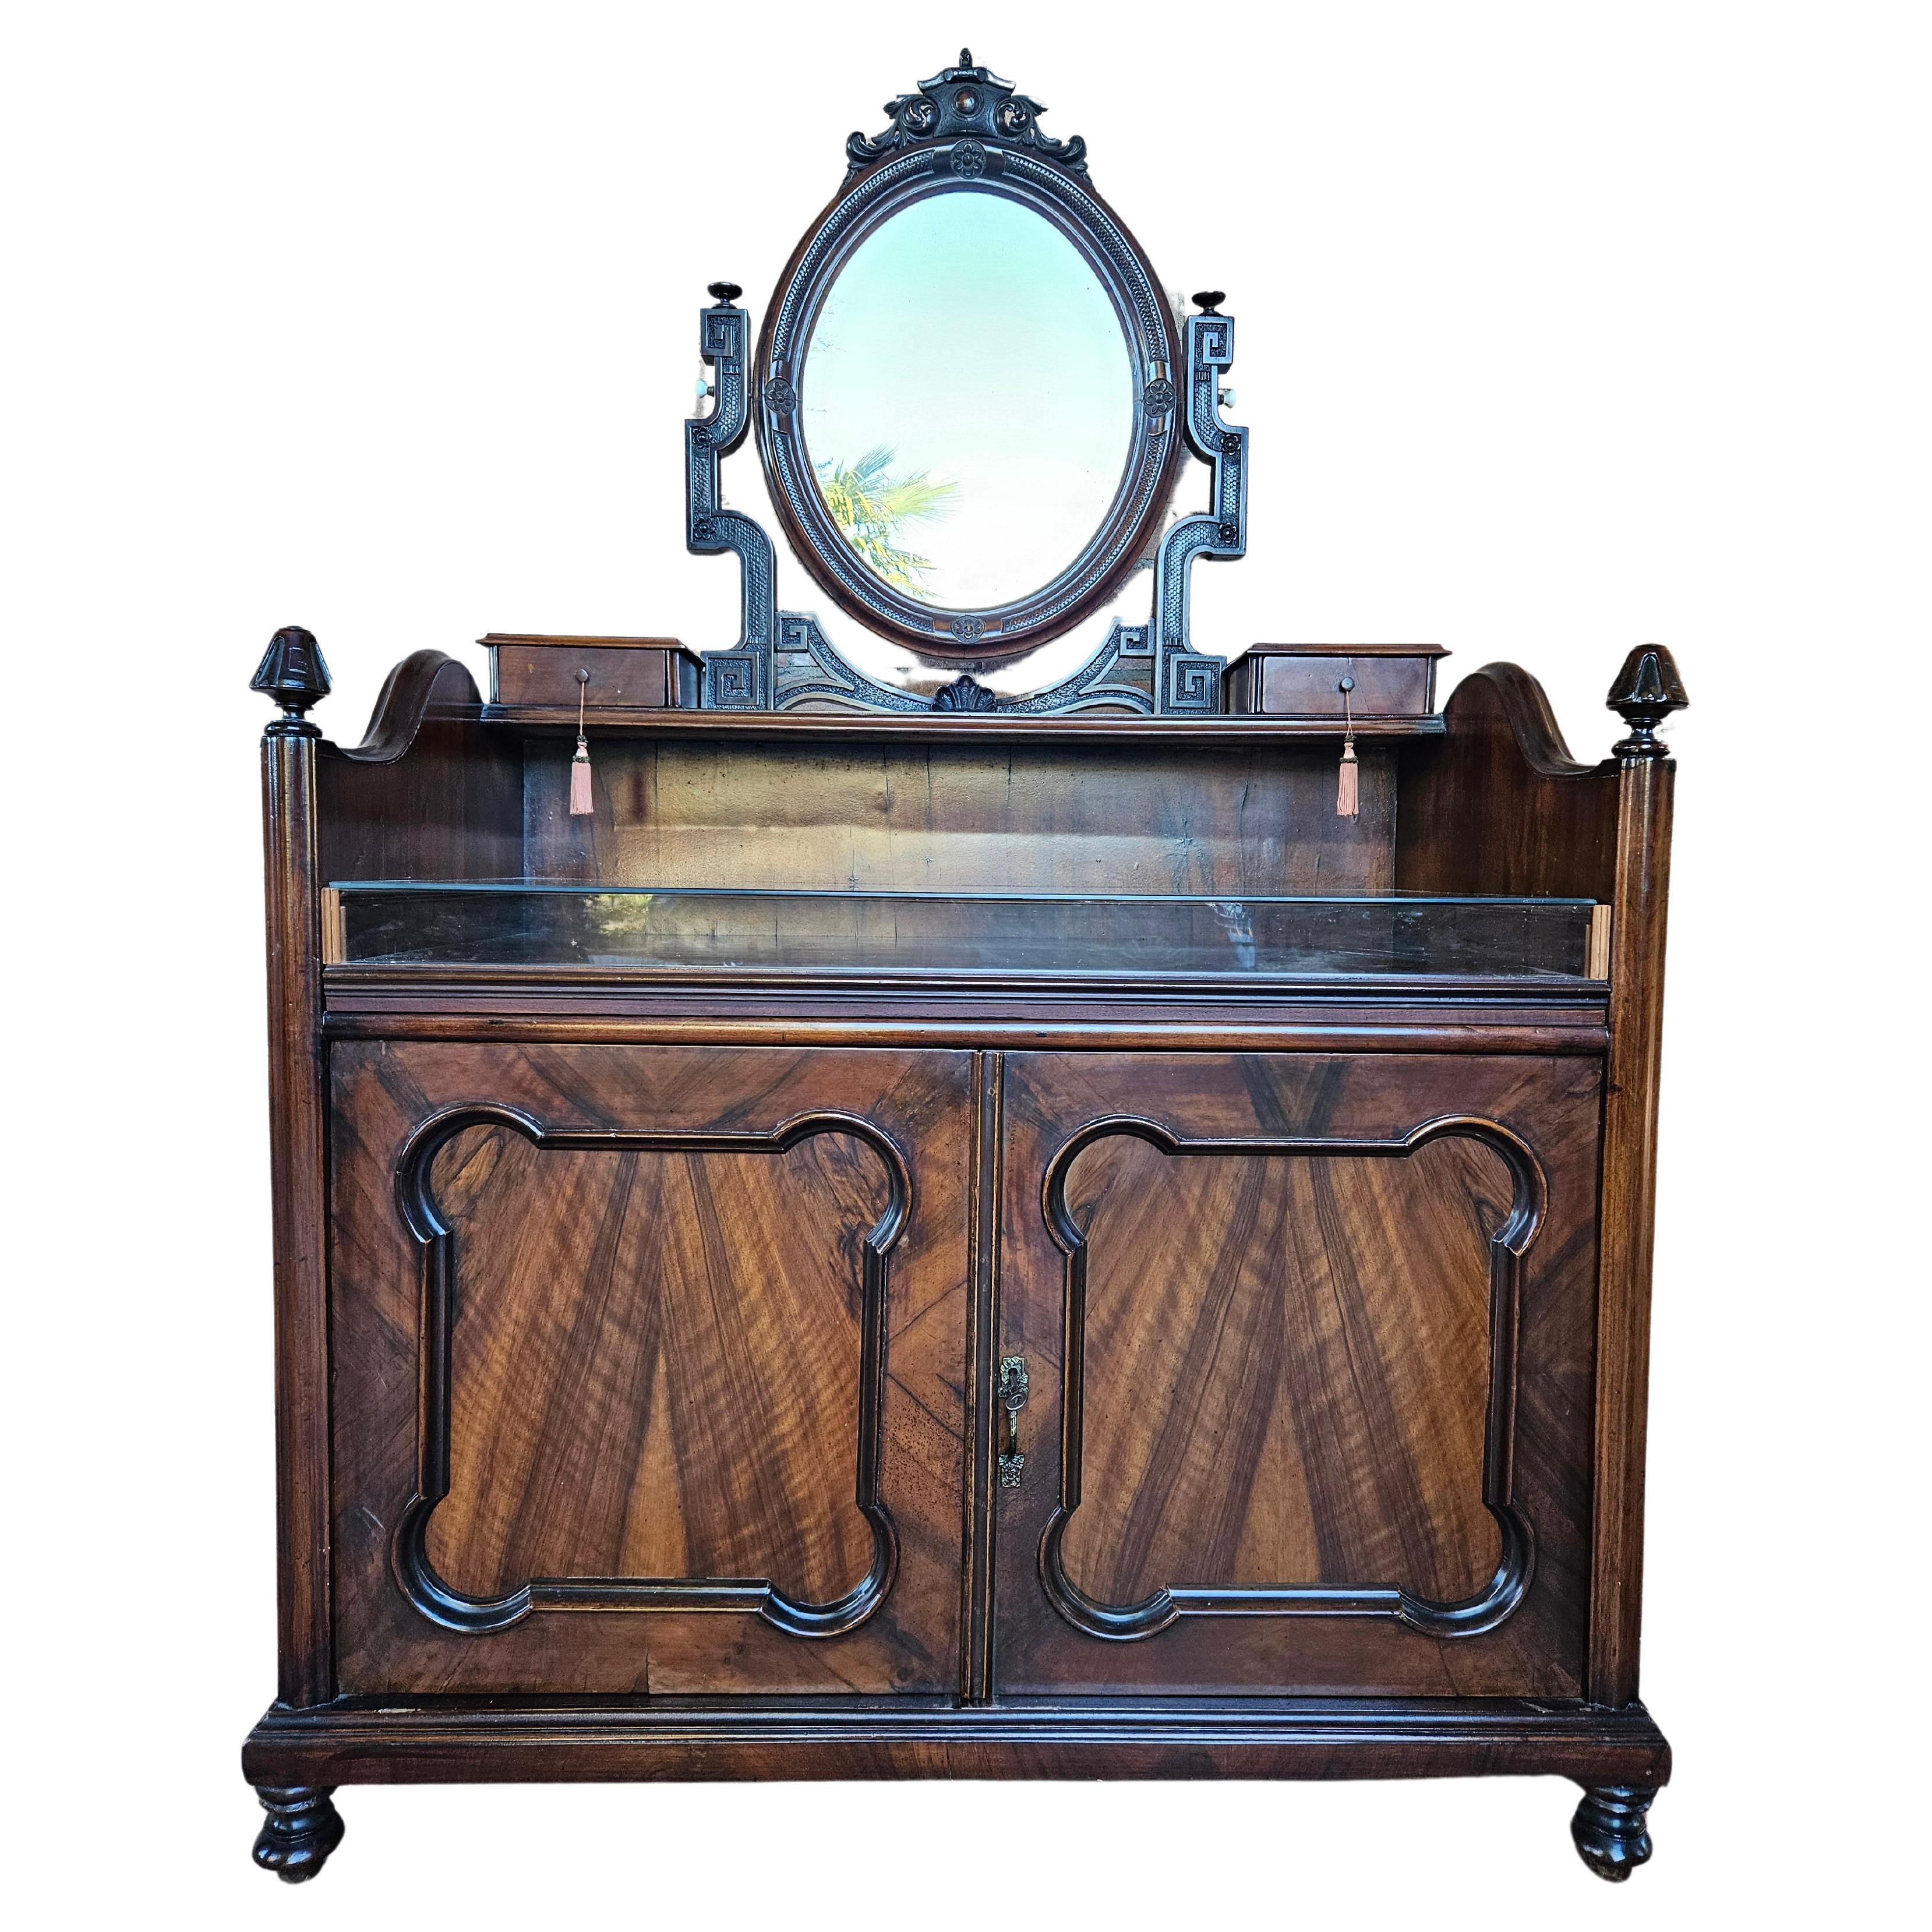 Mahogany sideboard with glass display and revolving mirror late 19th century